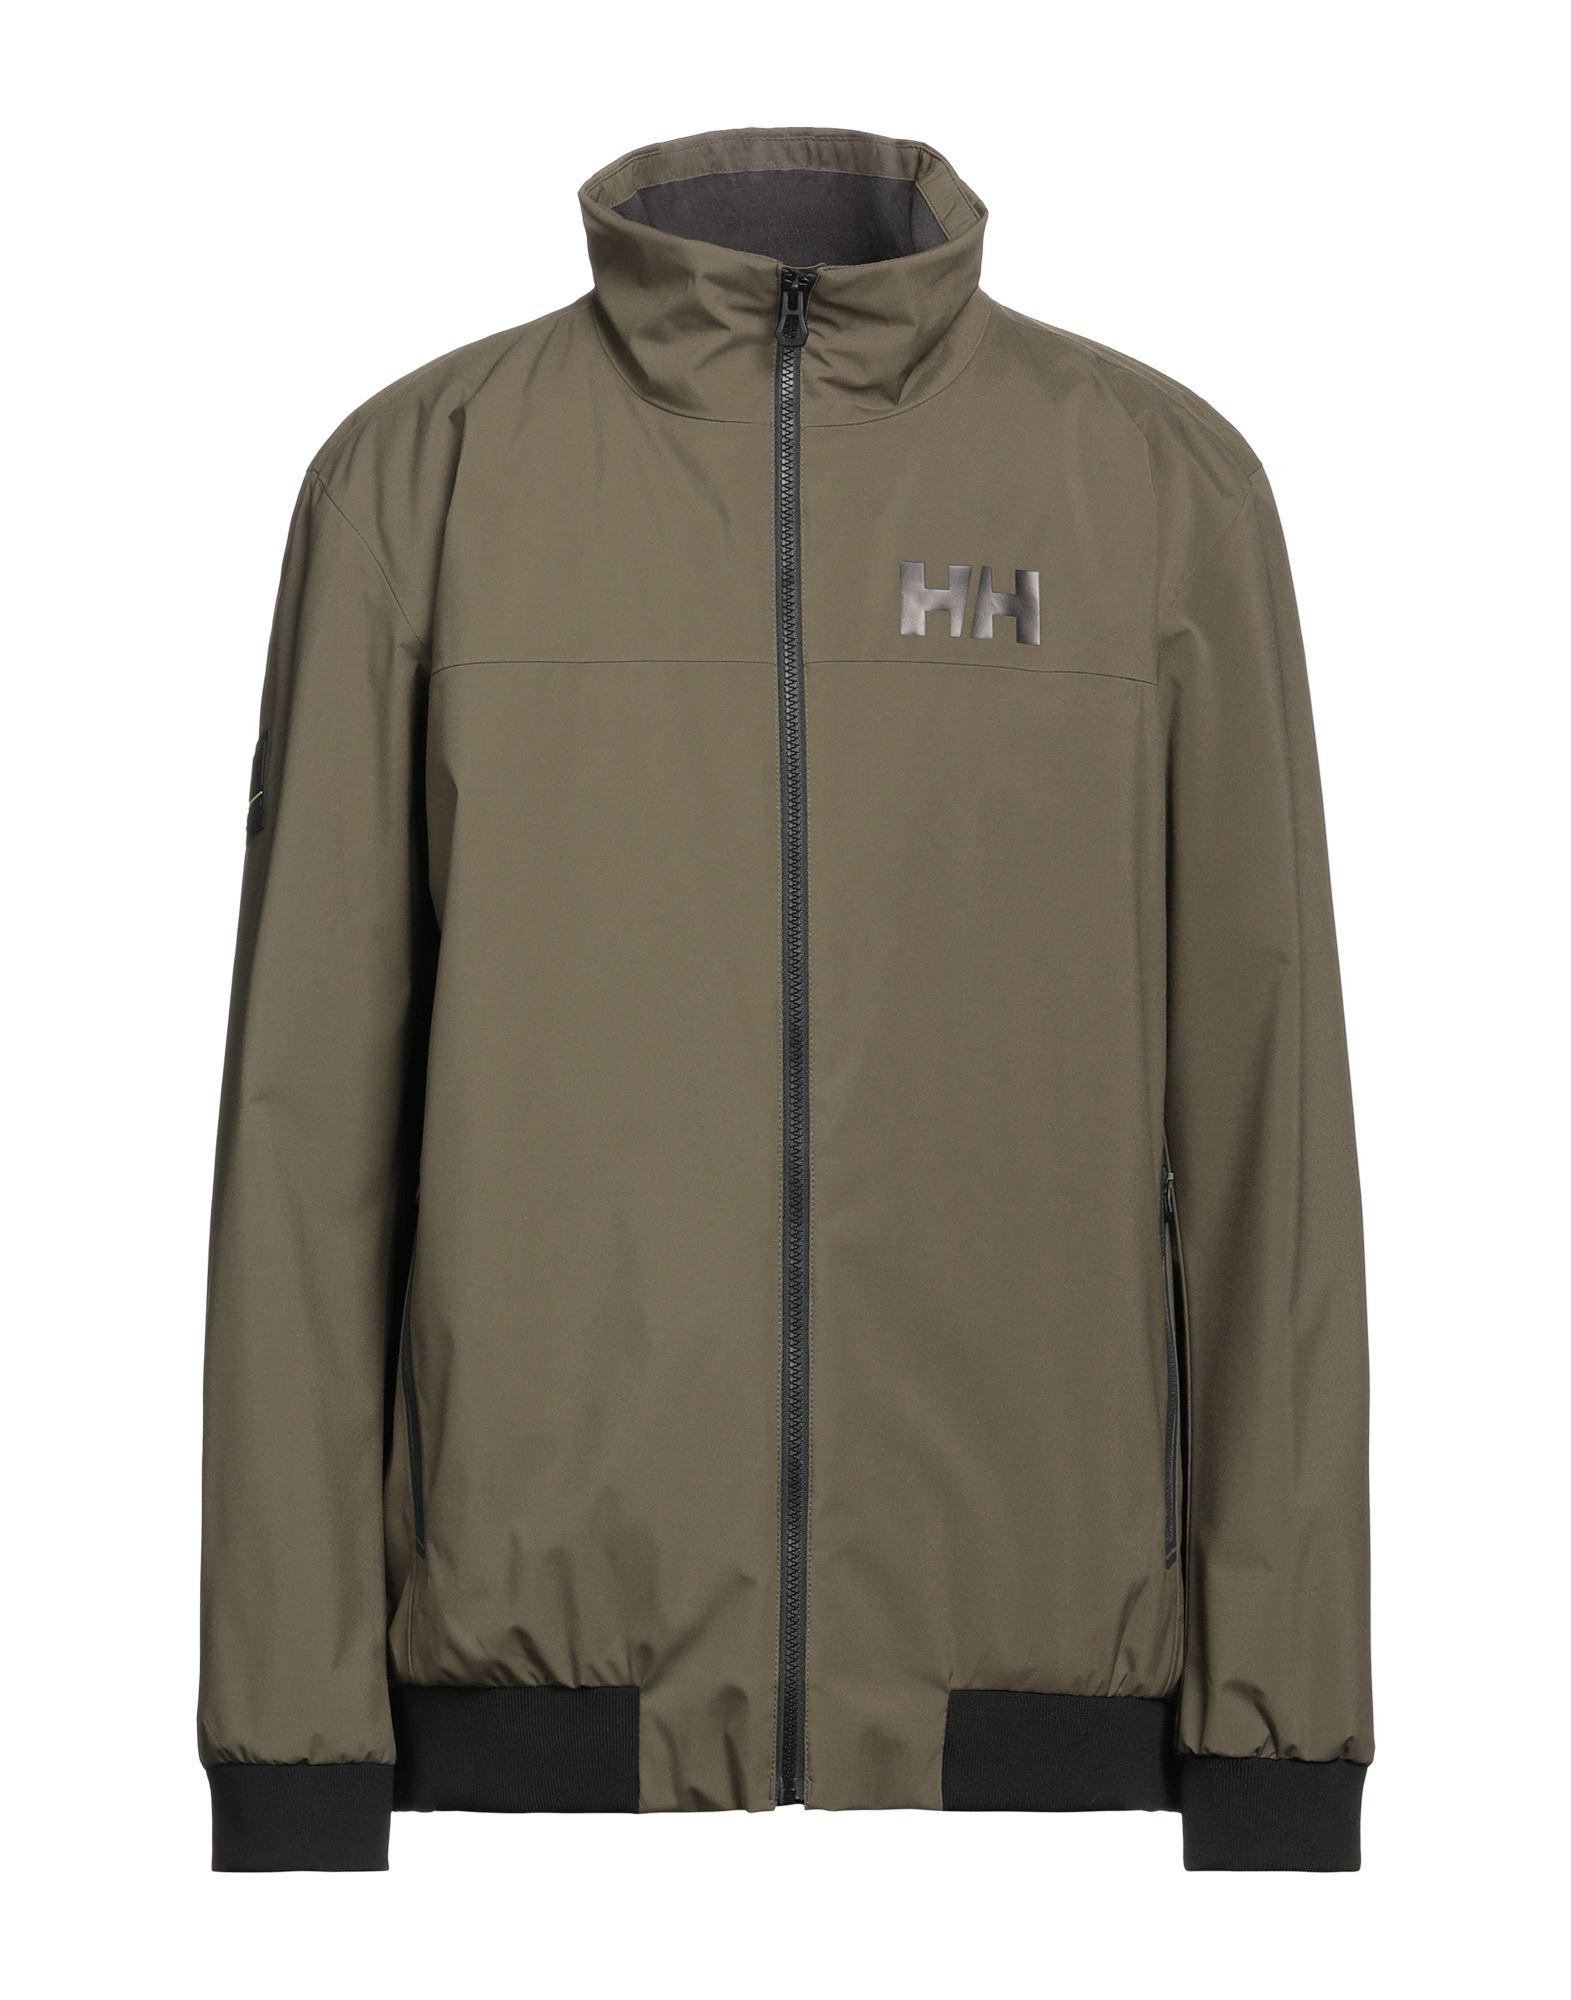 Helly Hansen Synthetic Jacket in Military Green (Green) for Men | Lyst